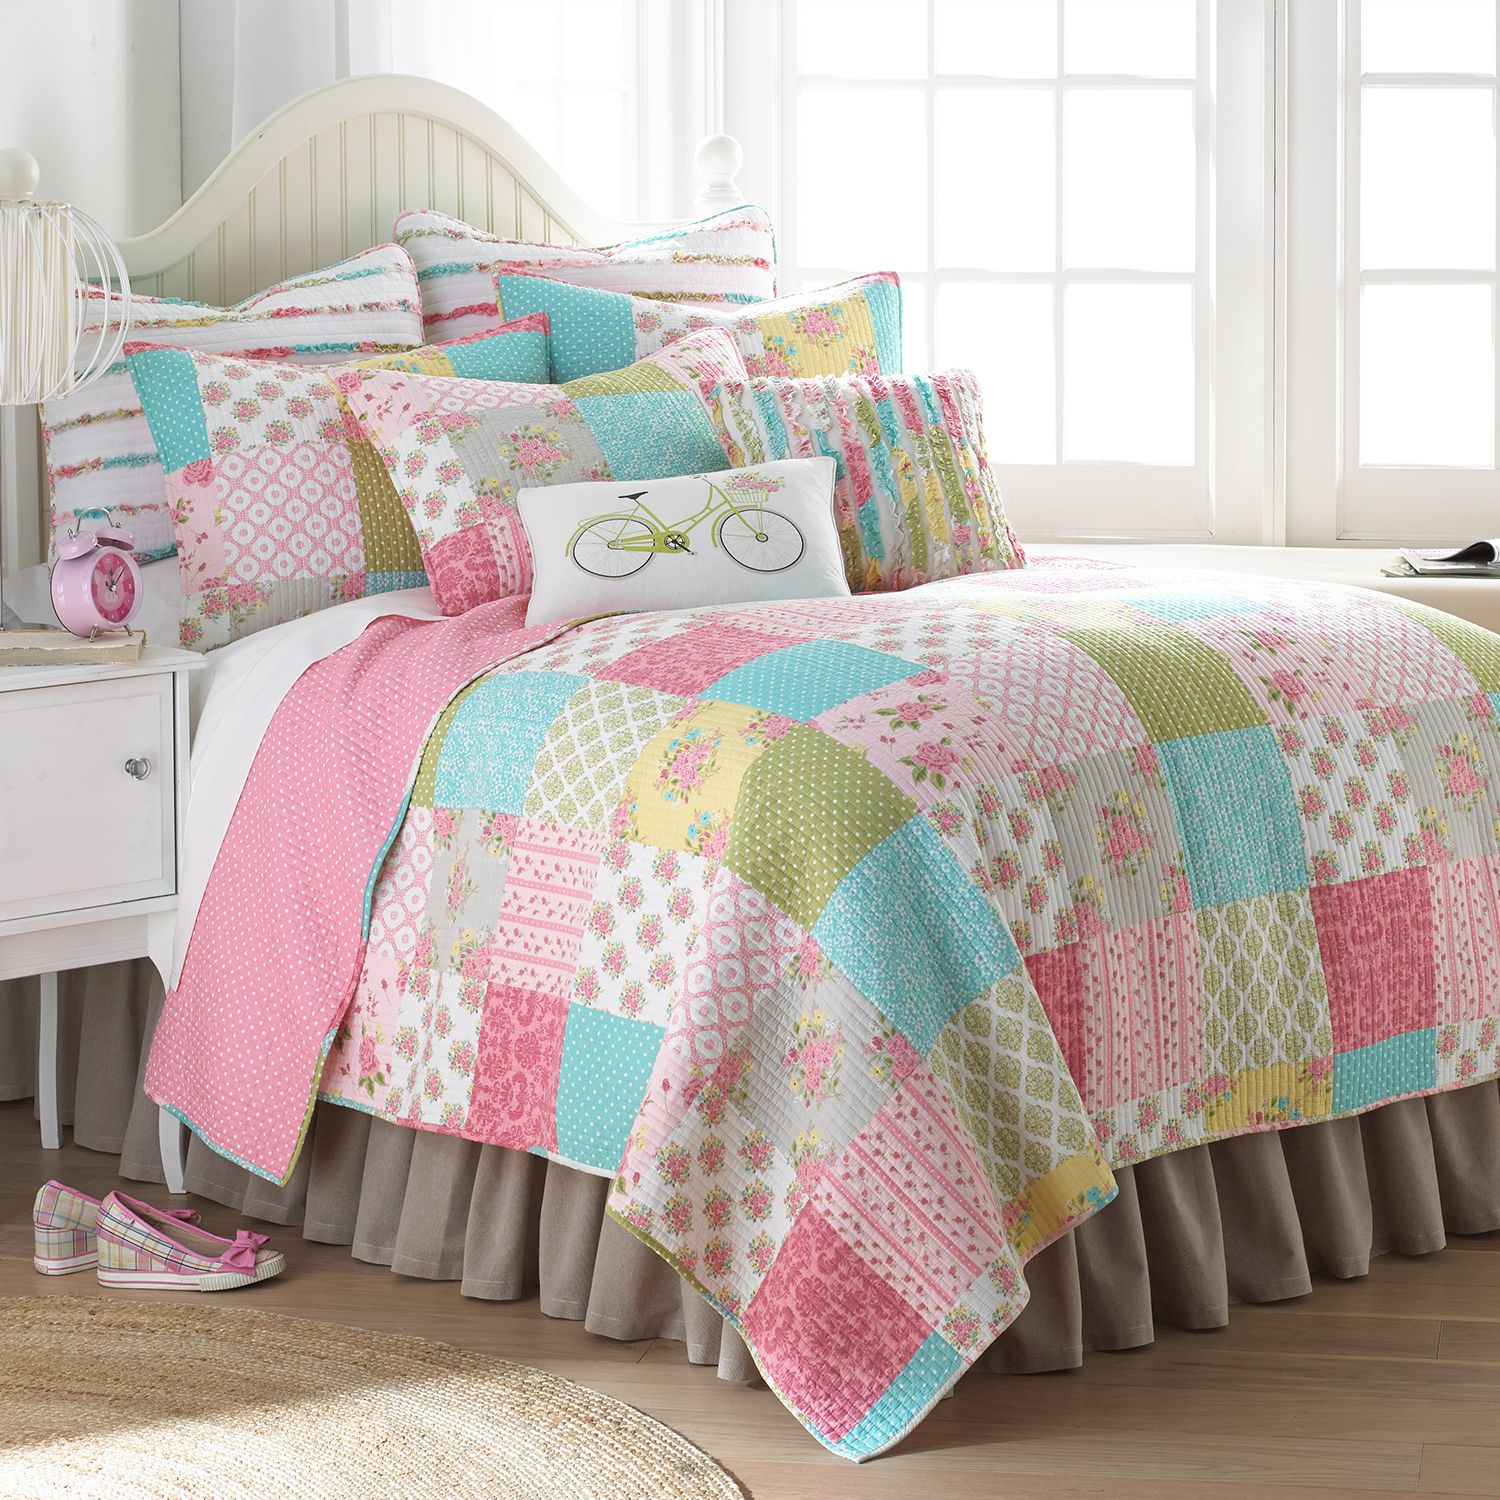 Image for Levtex Home Vintage Rose Garden Reversible Quilt Collection at Kohl's.